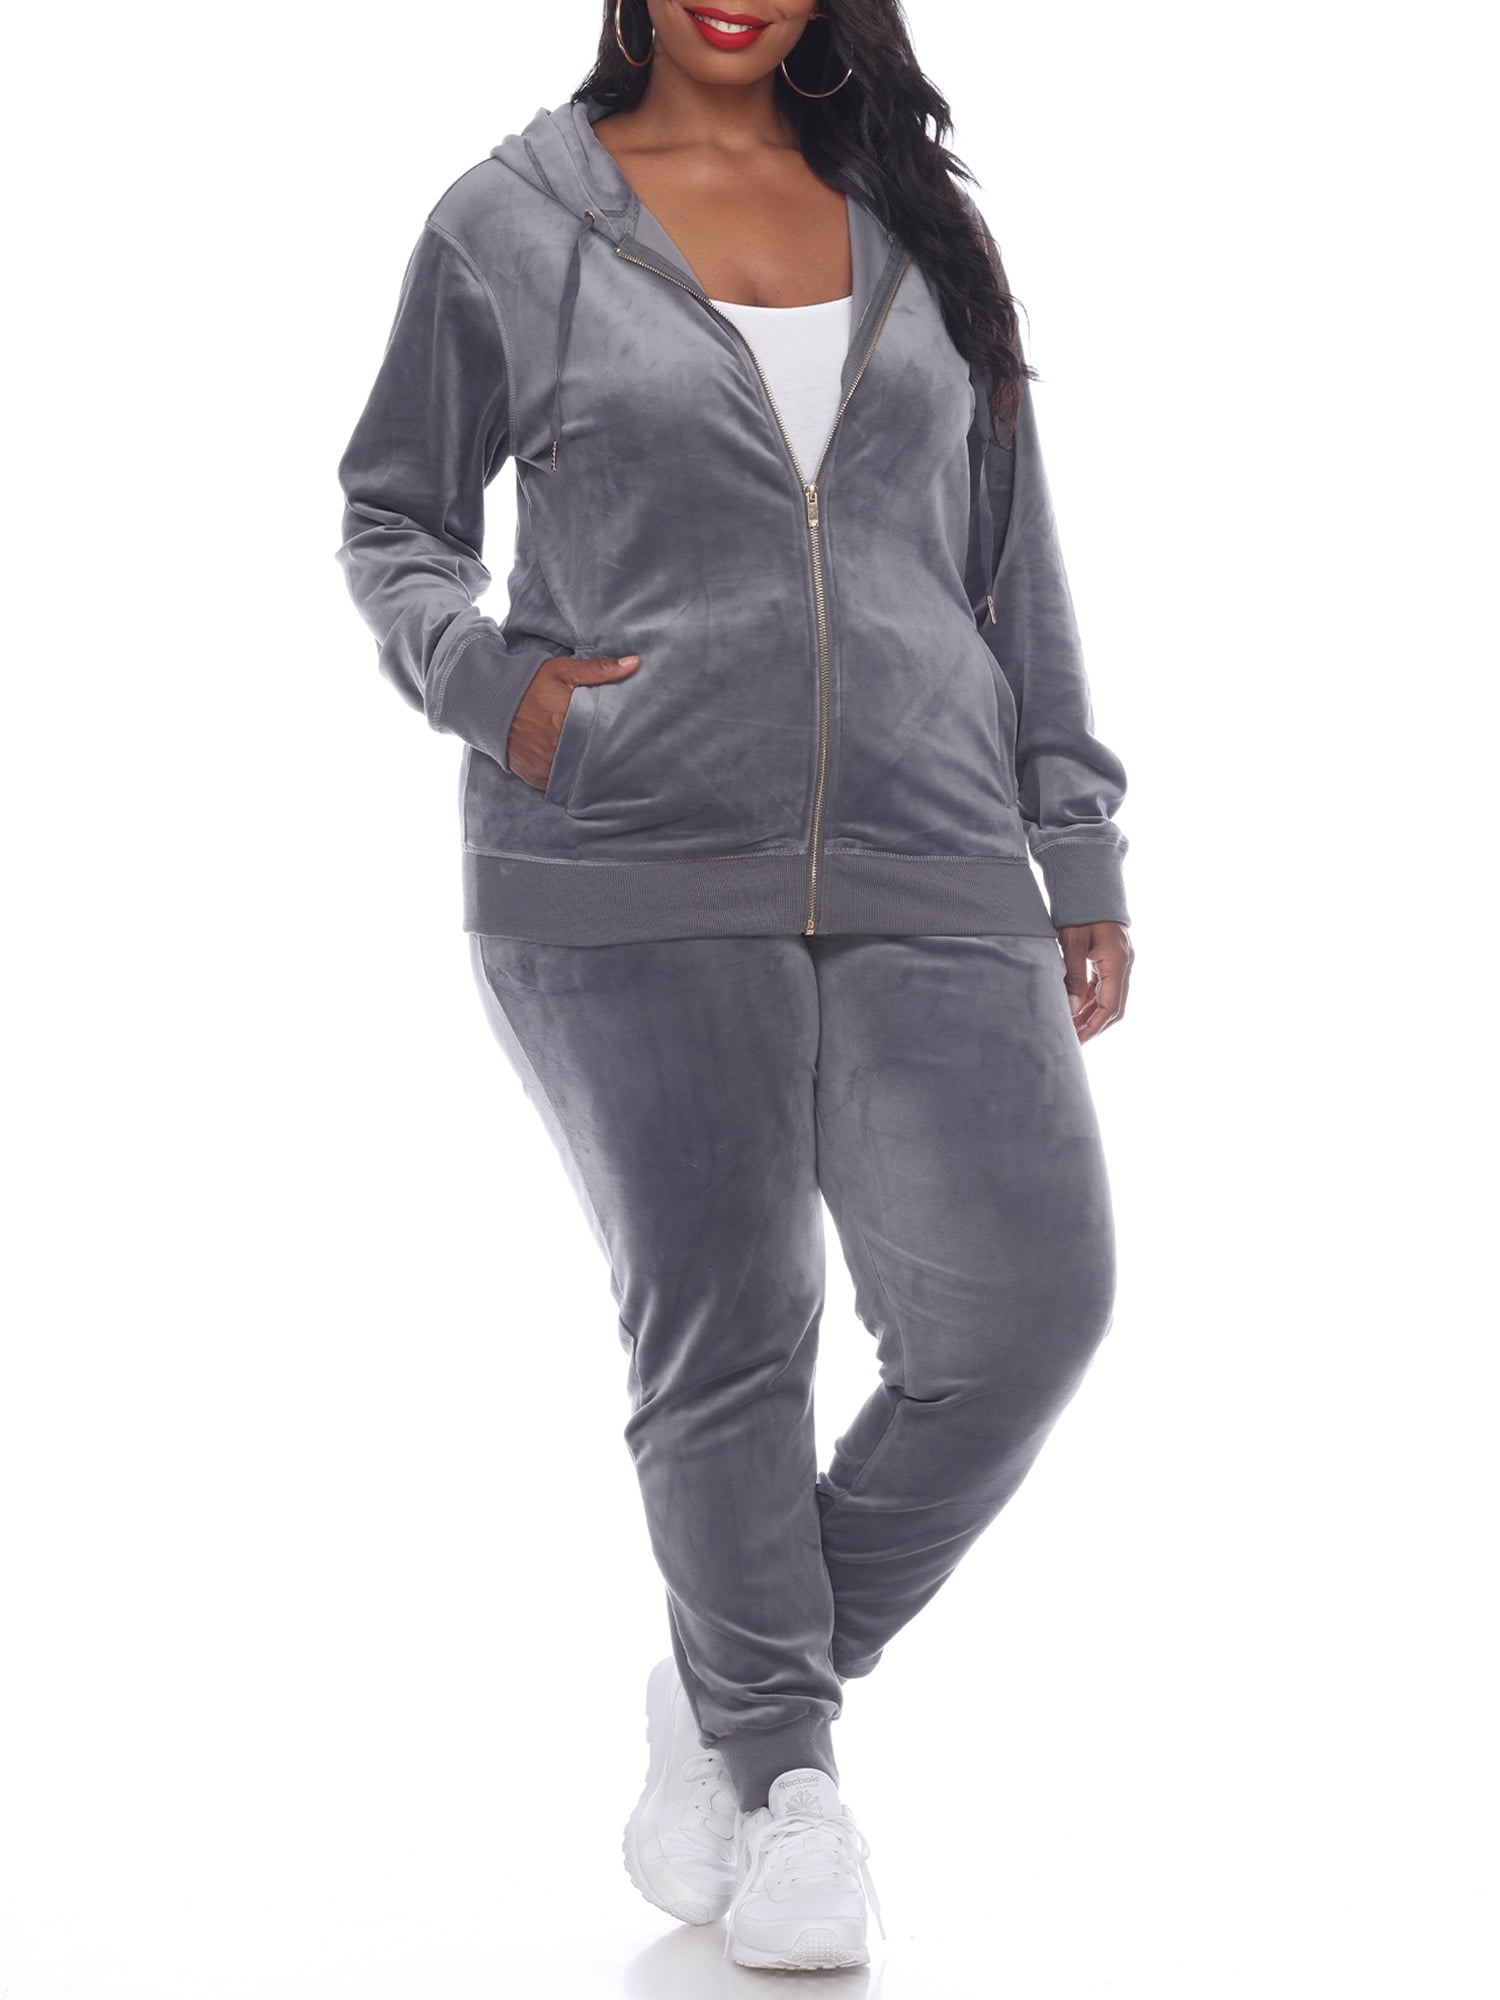 Plus Size Full Figure Womens Velour Tracksuit Red 18-26 6475-9 ICE 